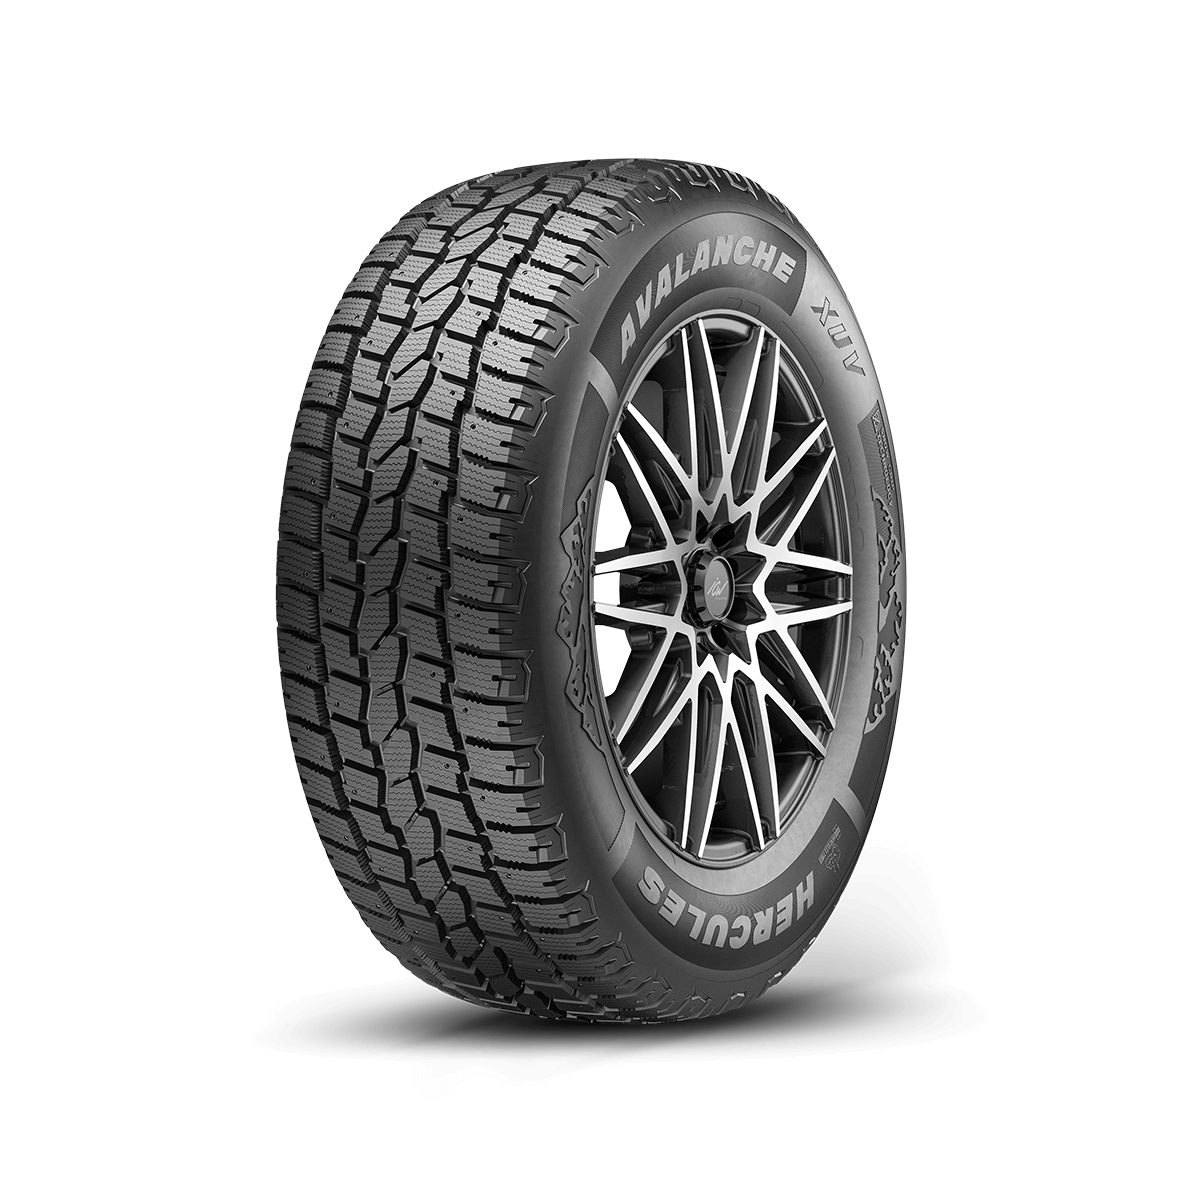 Avalanche® XUV | Tires by Name